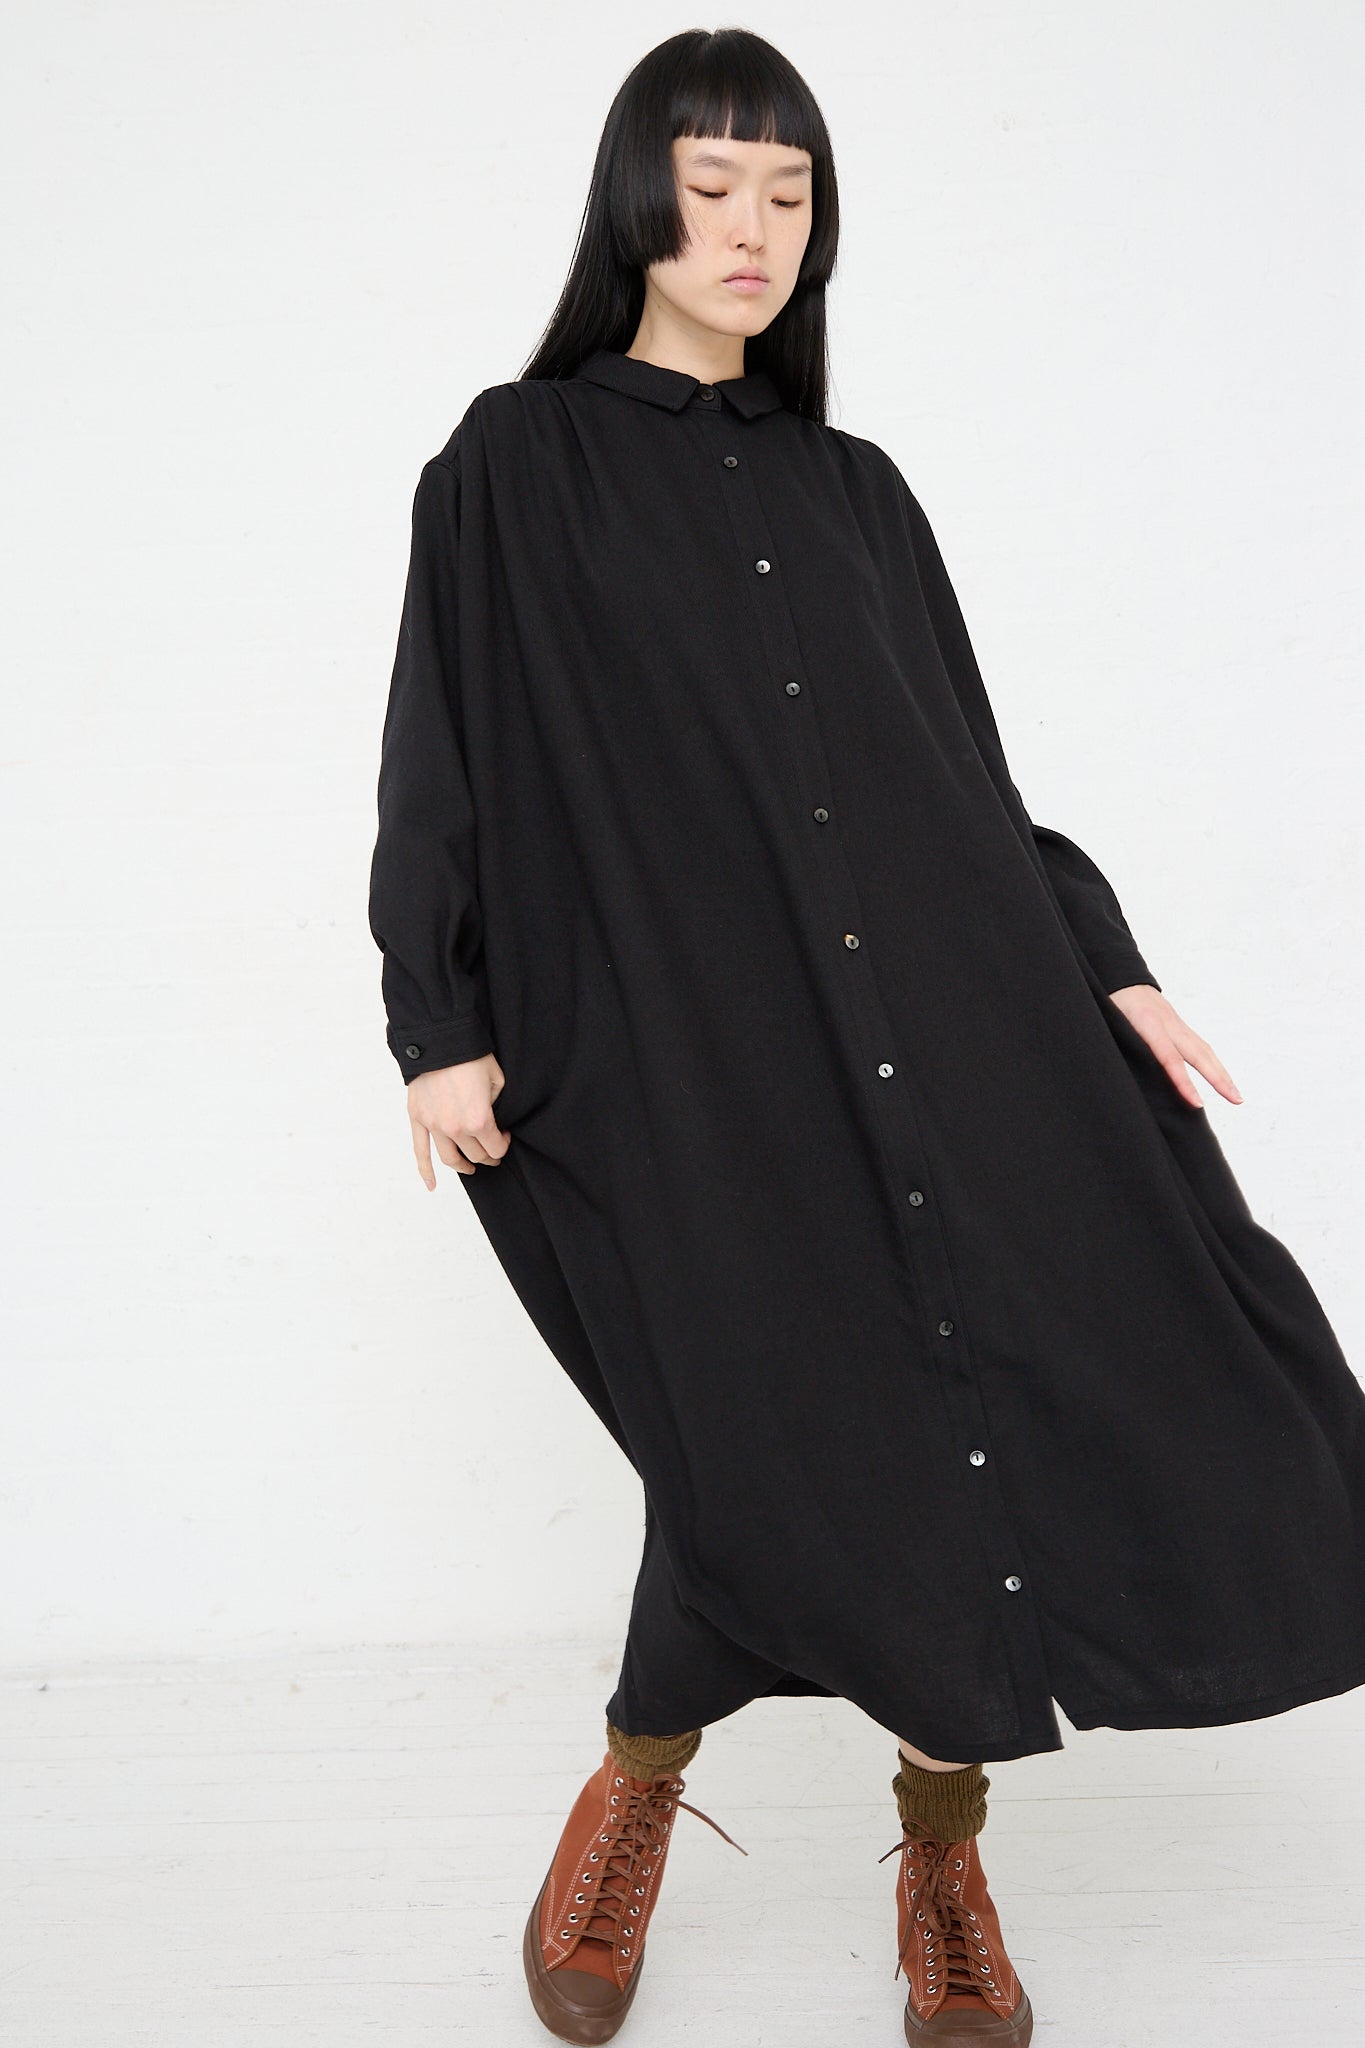 A woman wearing a long sleeve Ichi woven dress in black made of natural fibers.